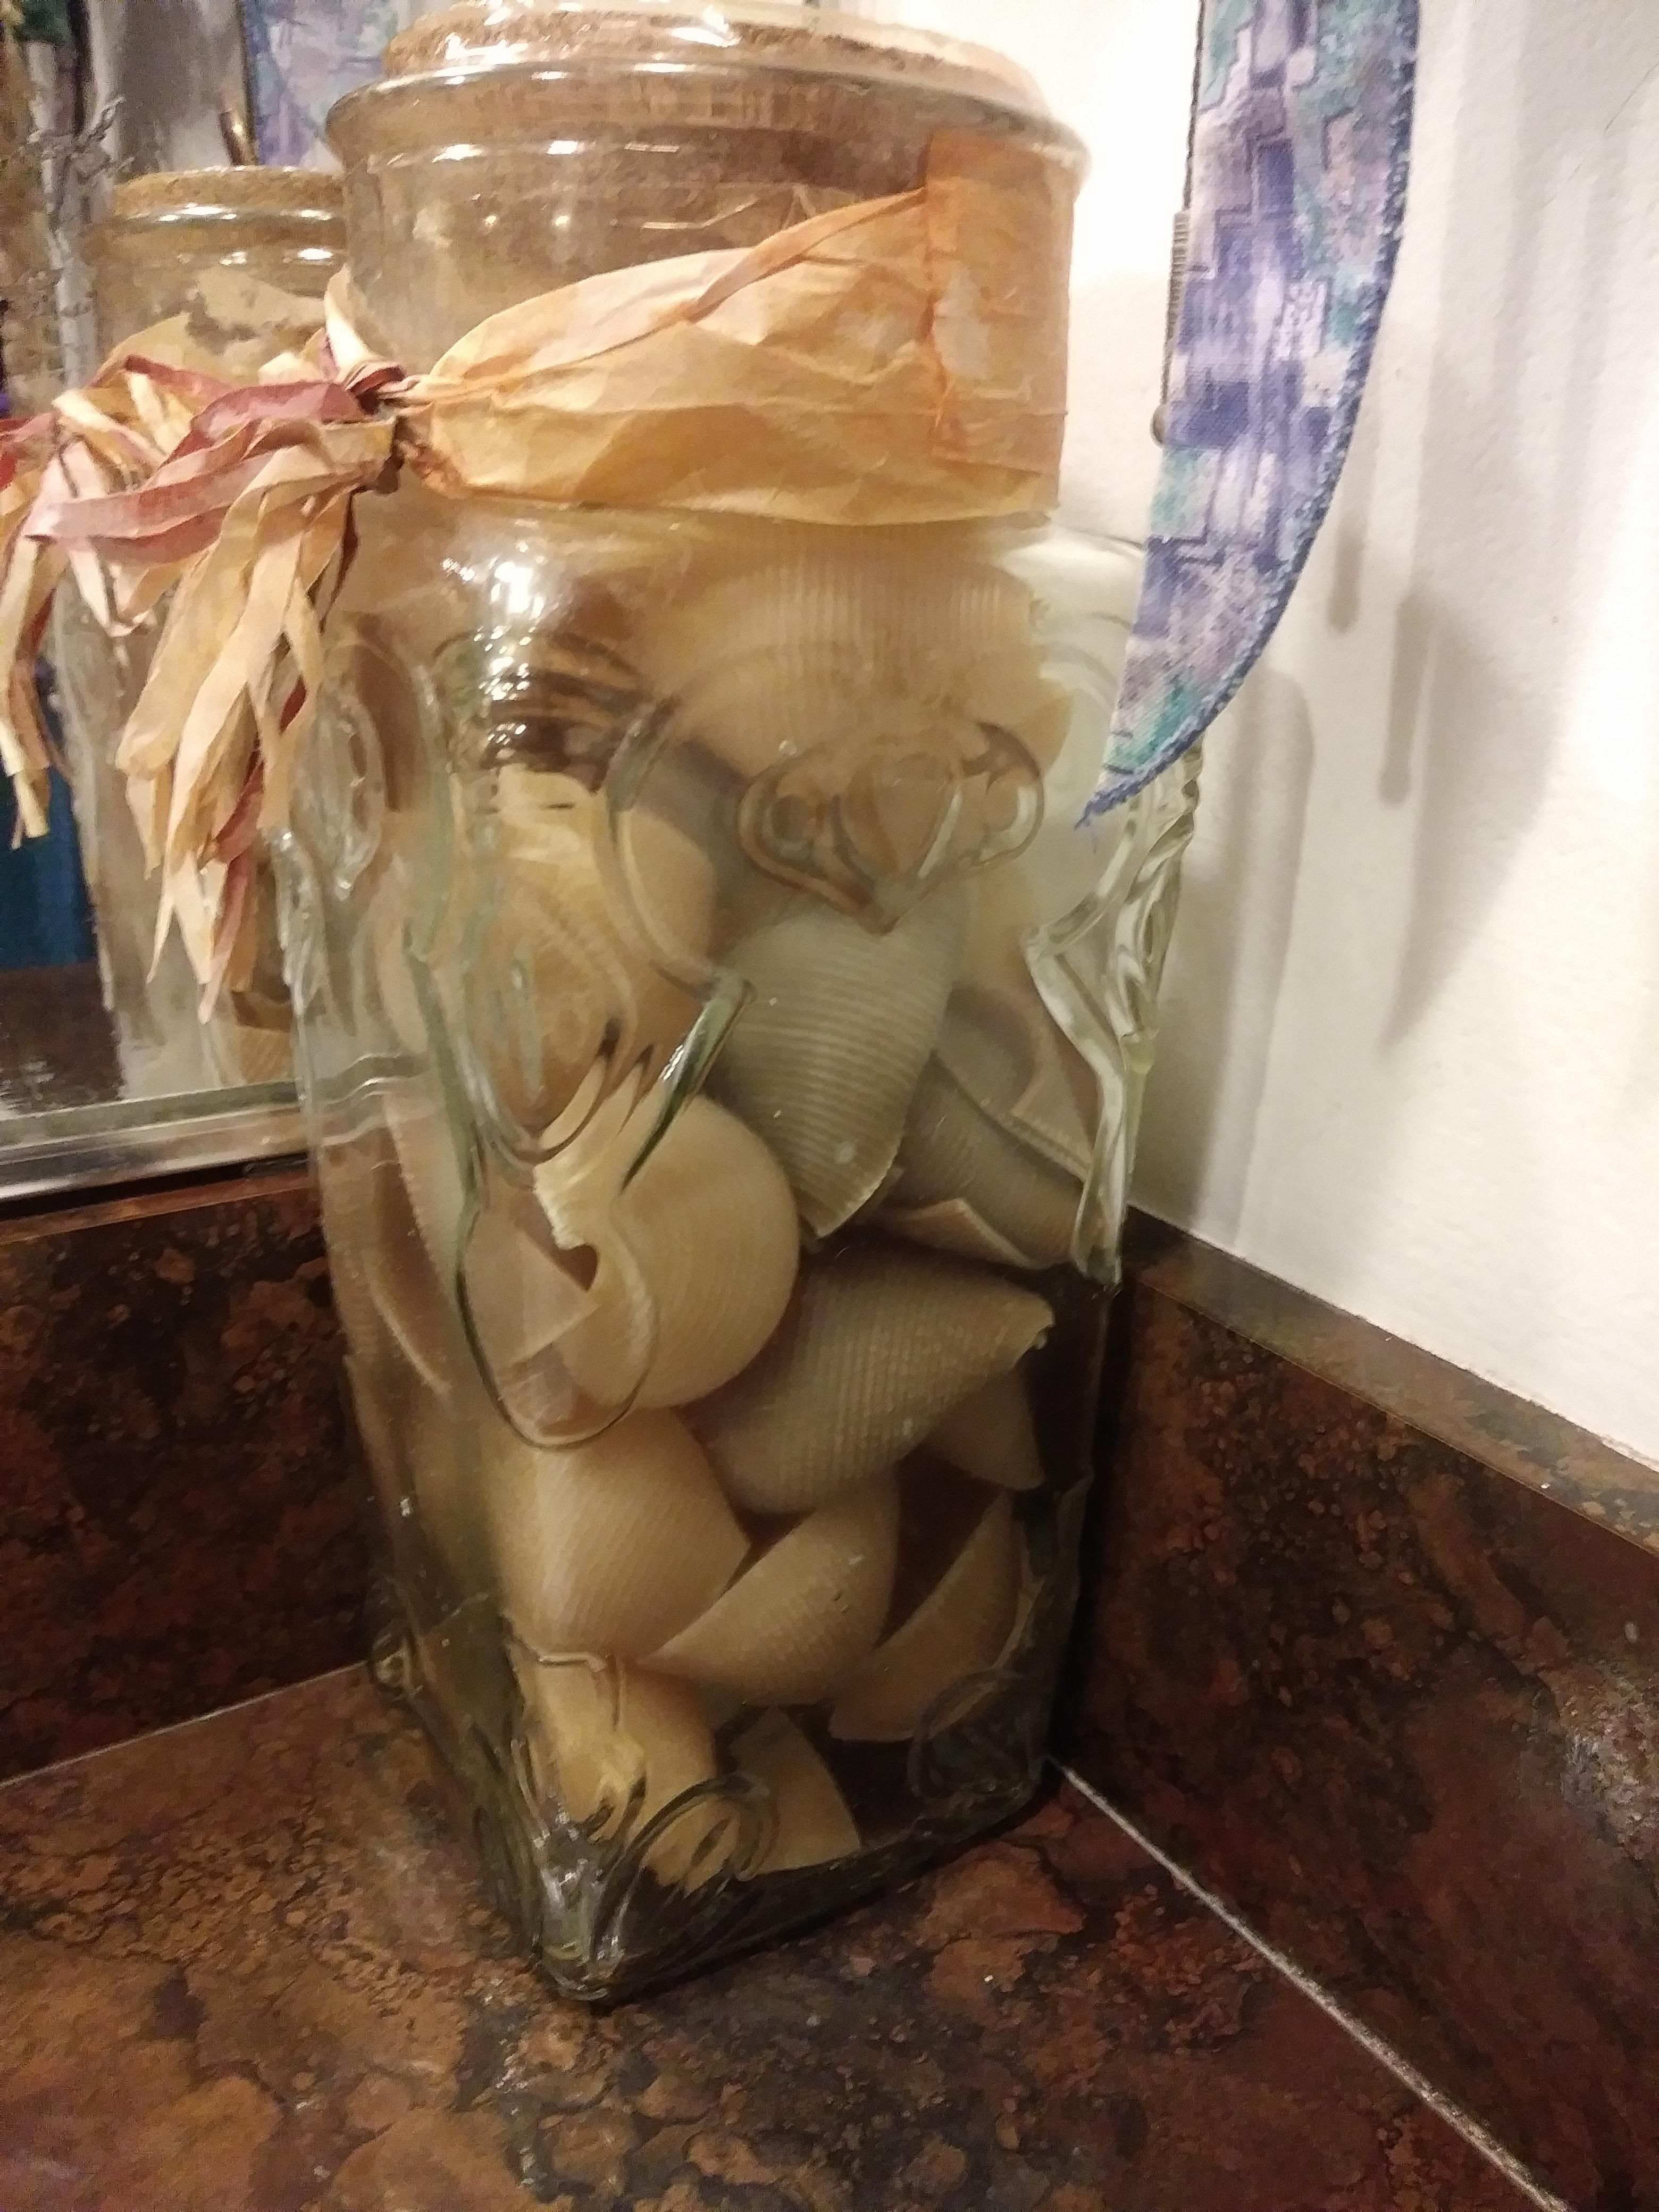 Was cleaning my mom's bathroom and realized that this jar that's been sitting there for 15 years is not filled with sea shells. It's filled with pasta shells...